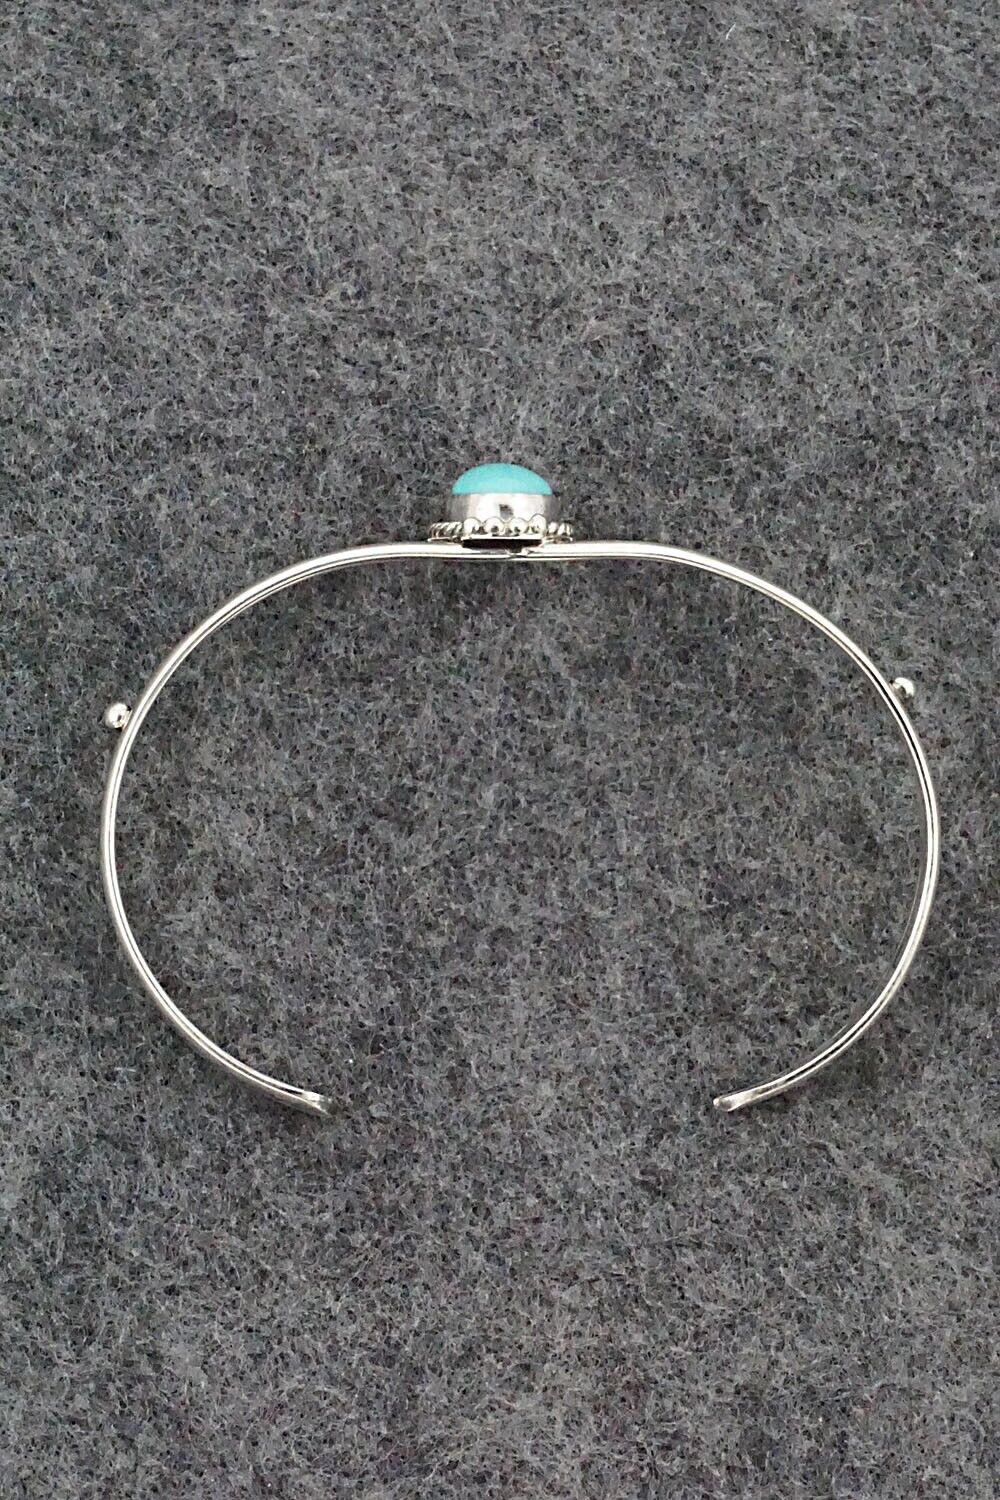 Turquoise & Sterling Silver Bracelet - Jan Mariano